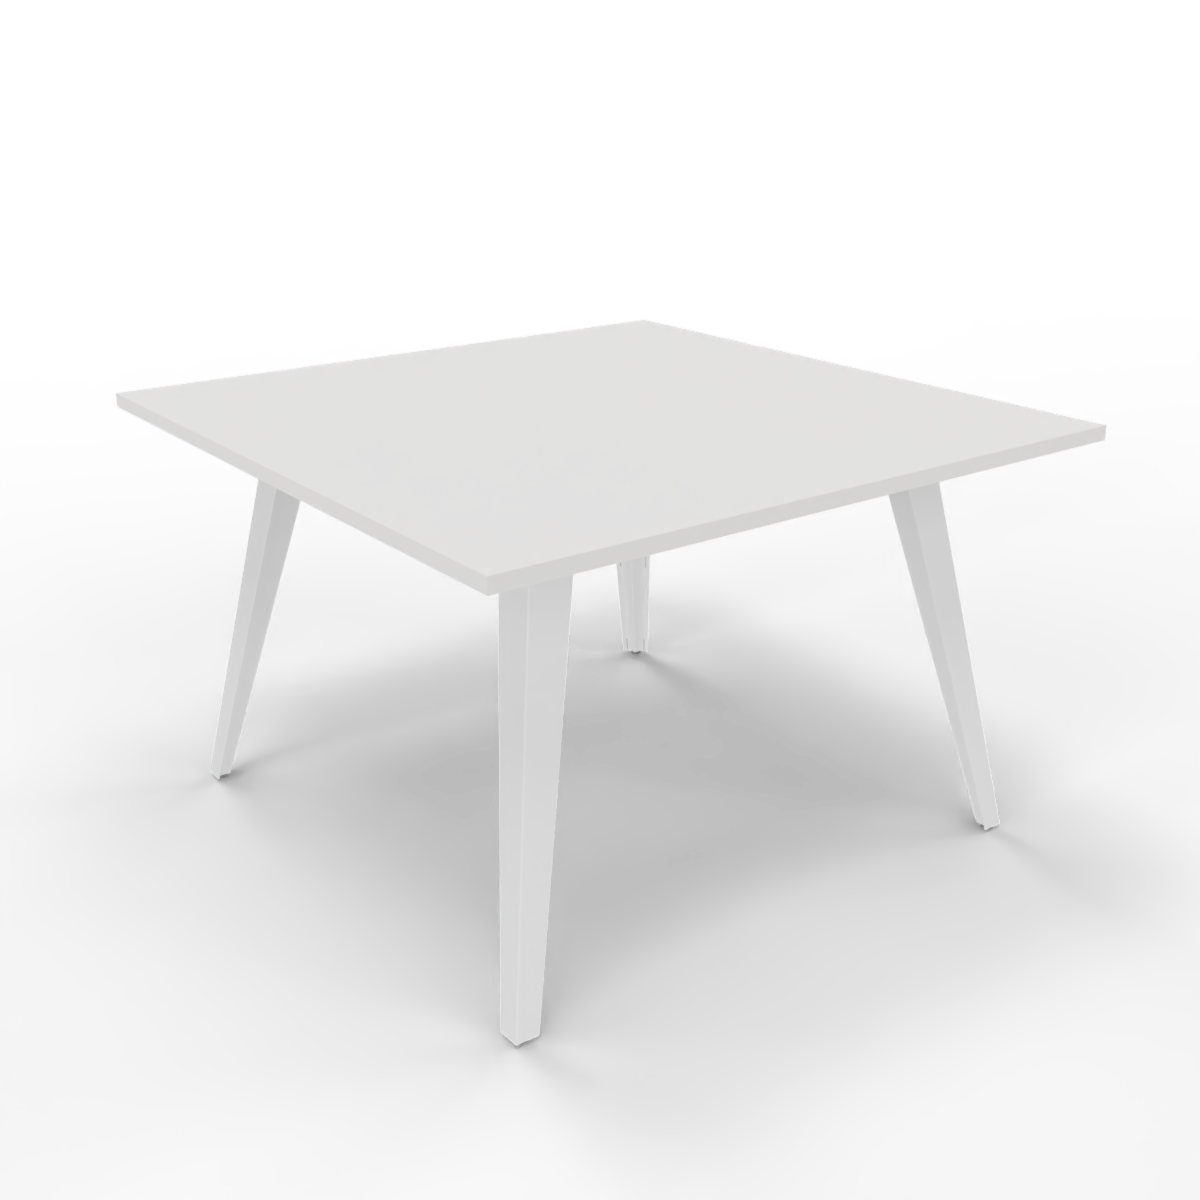 Spider meeting table